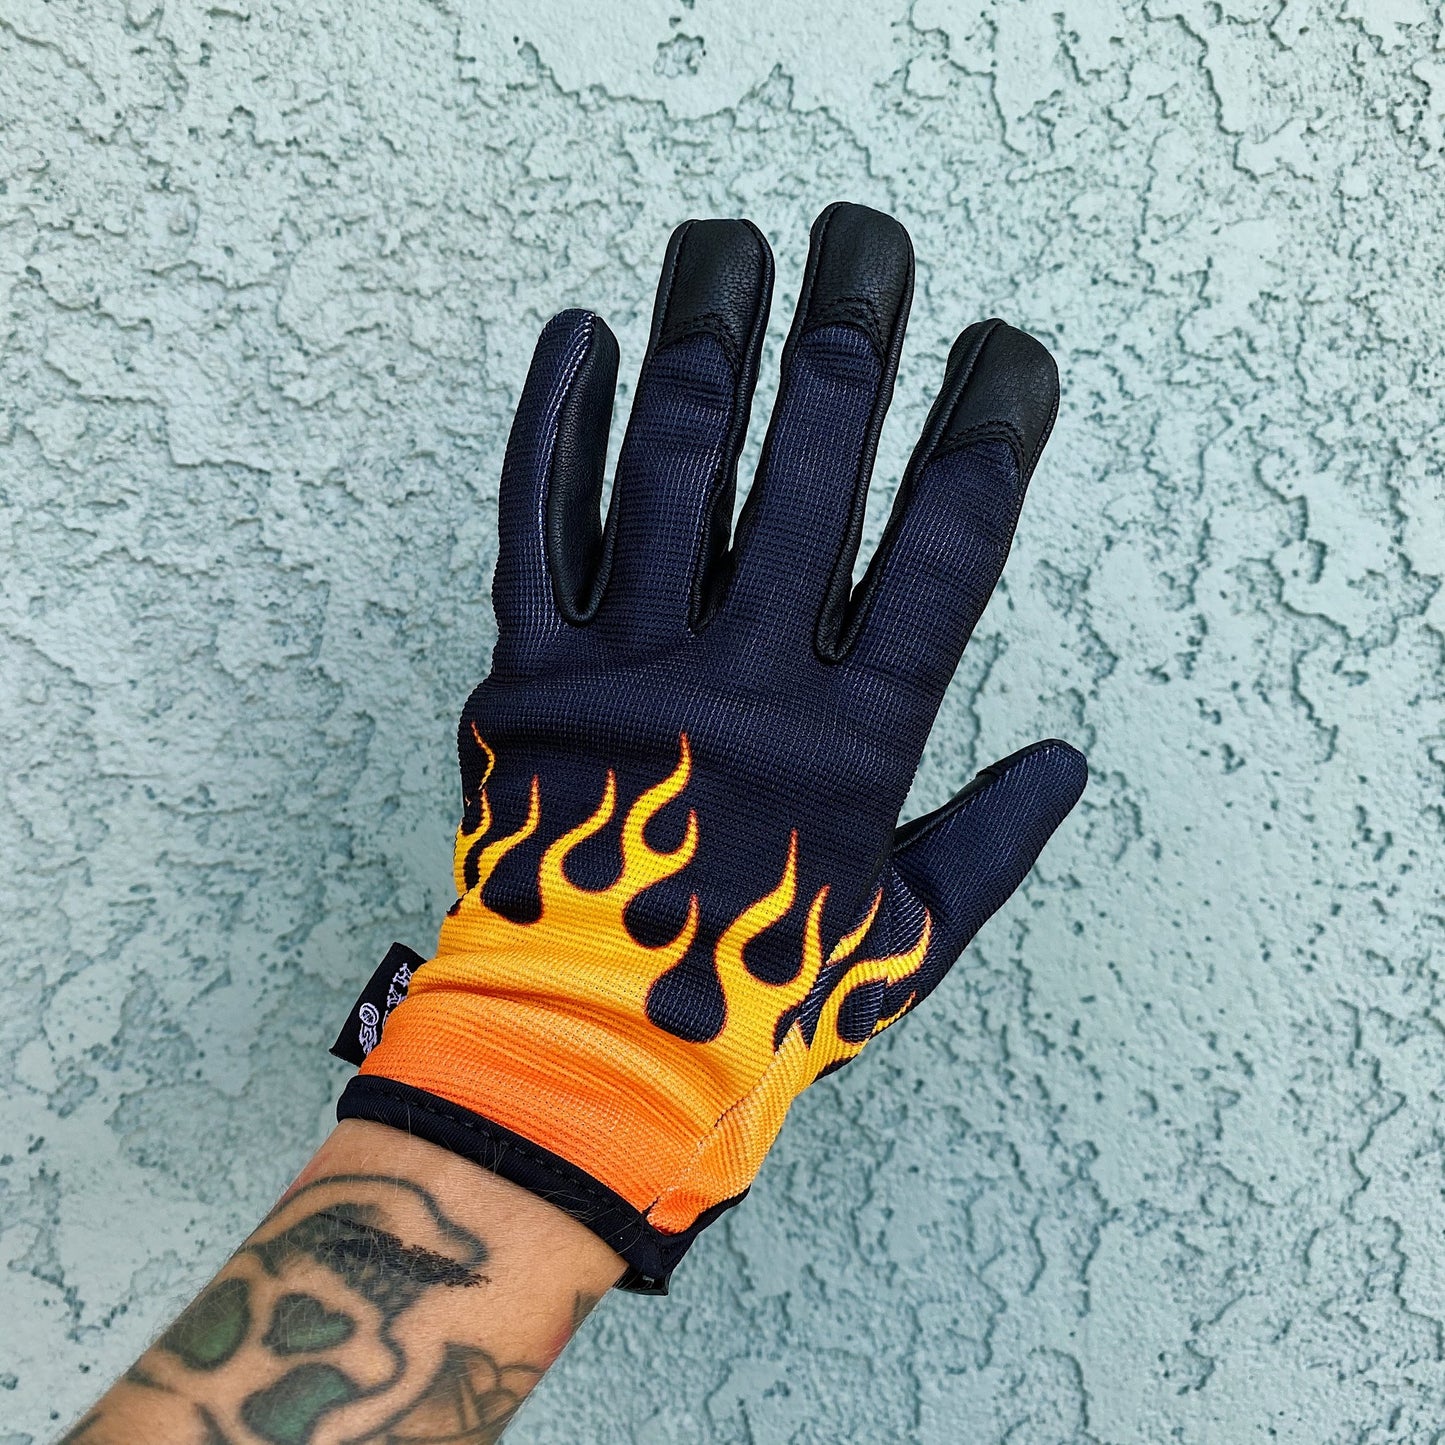 AXEL CO. Flamed Leather/Mesh Glove - Black/Orange/Yellow